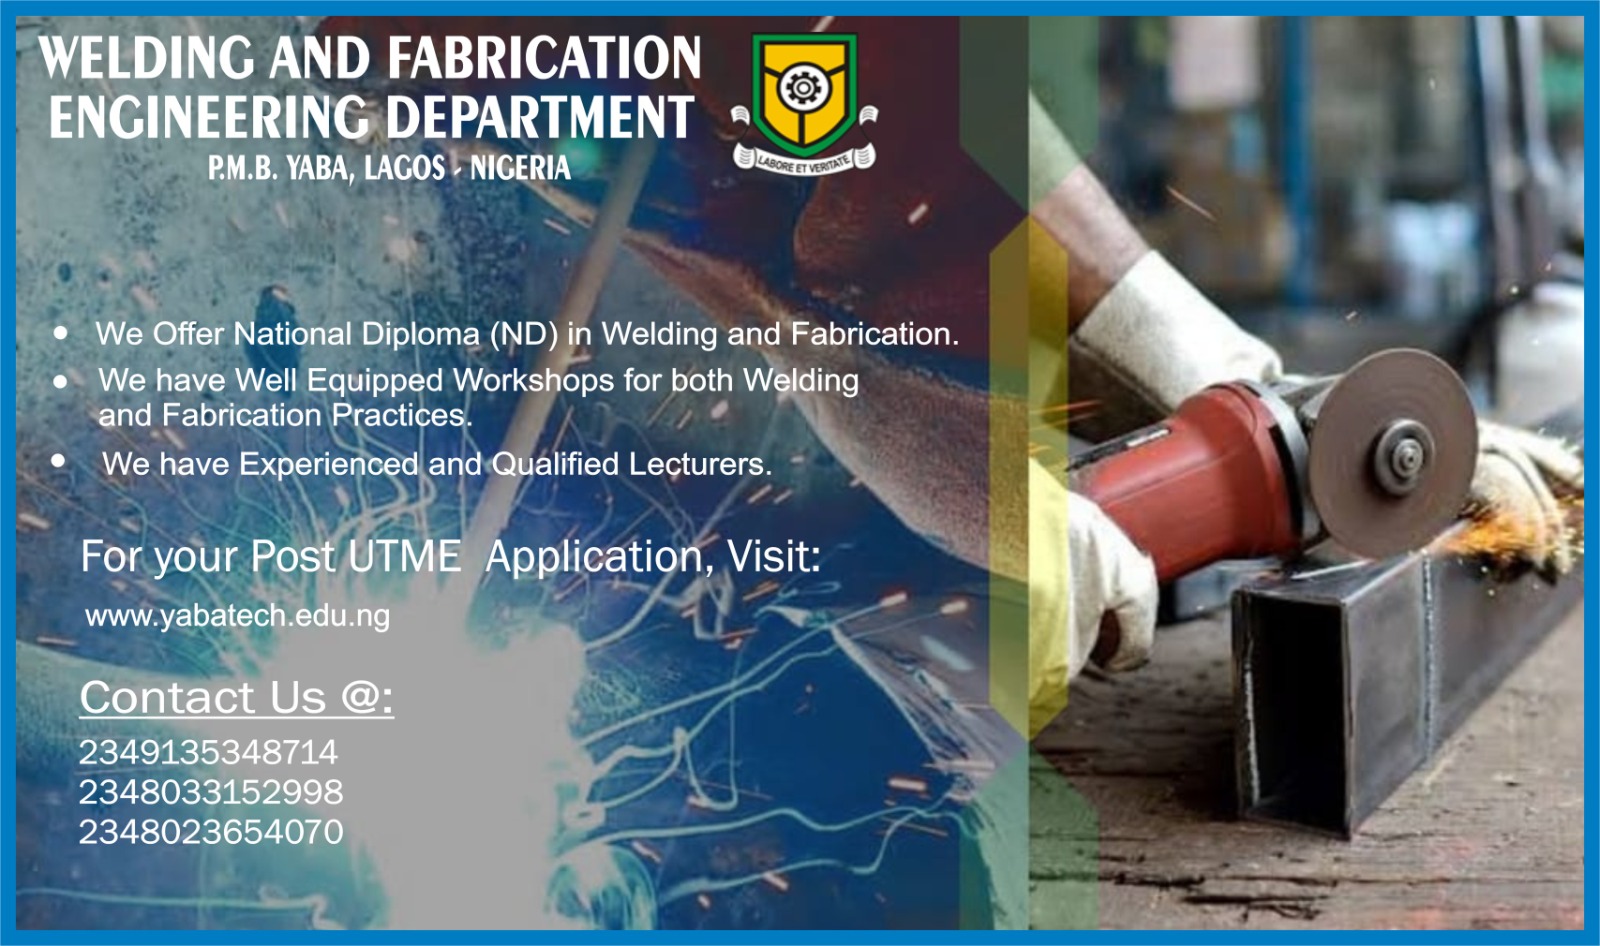 WELDING AND FABRICATION DEPARTMENT